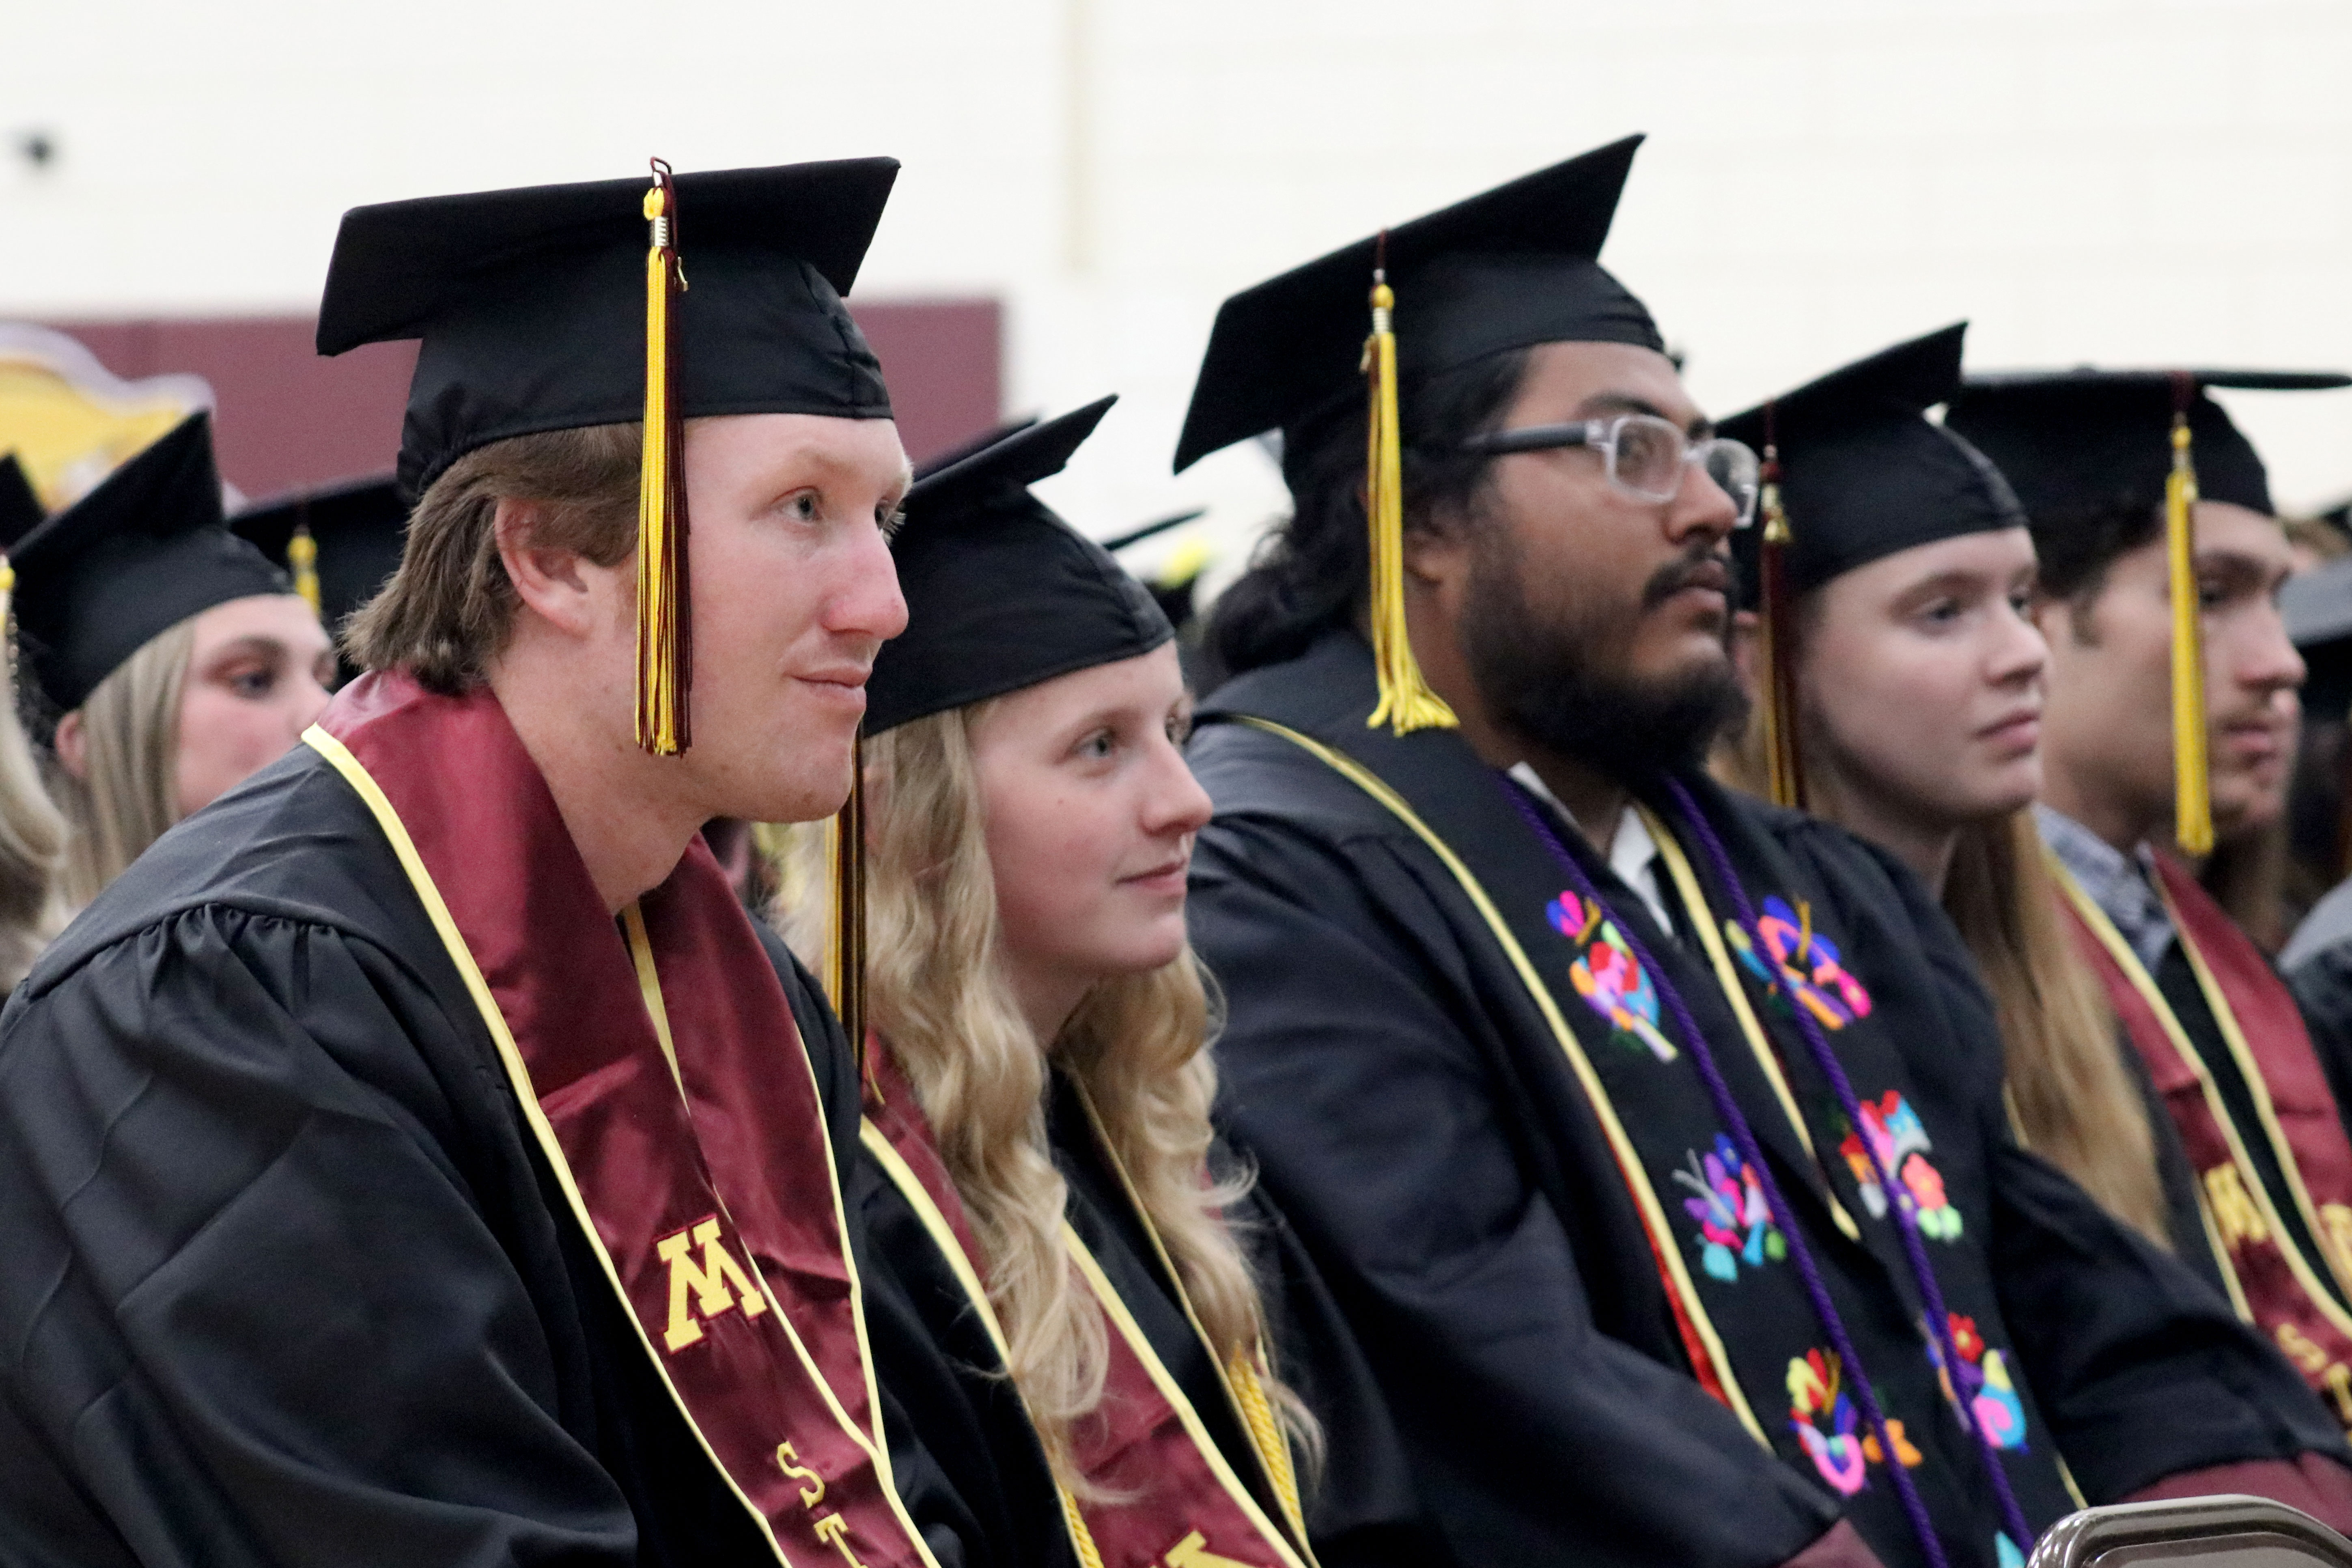 Graduates in caps and gowns listening to a speech at a commencement ceremony.